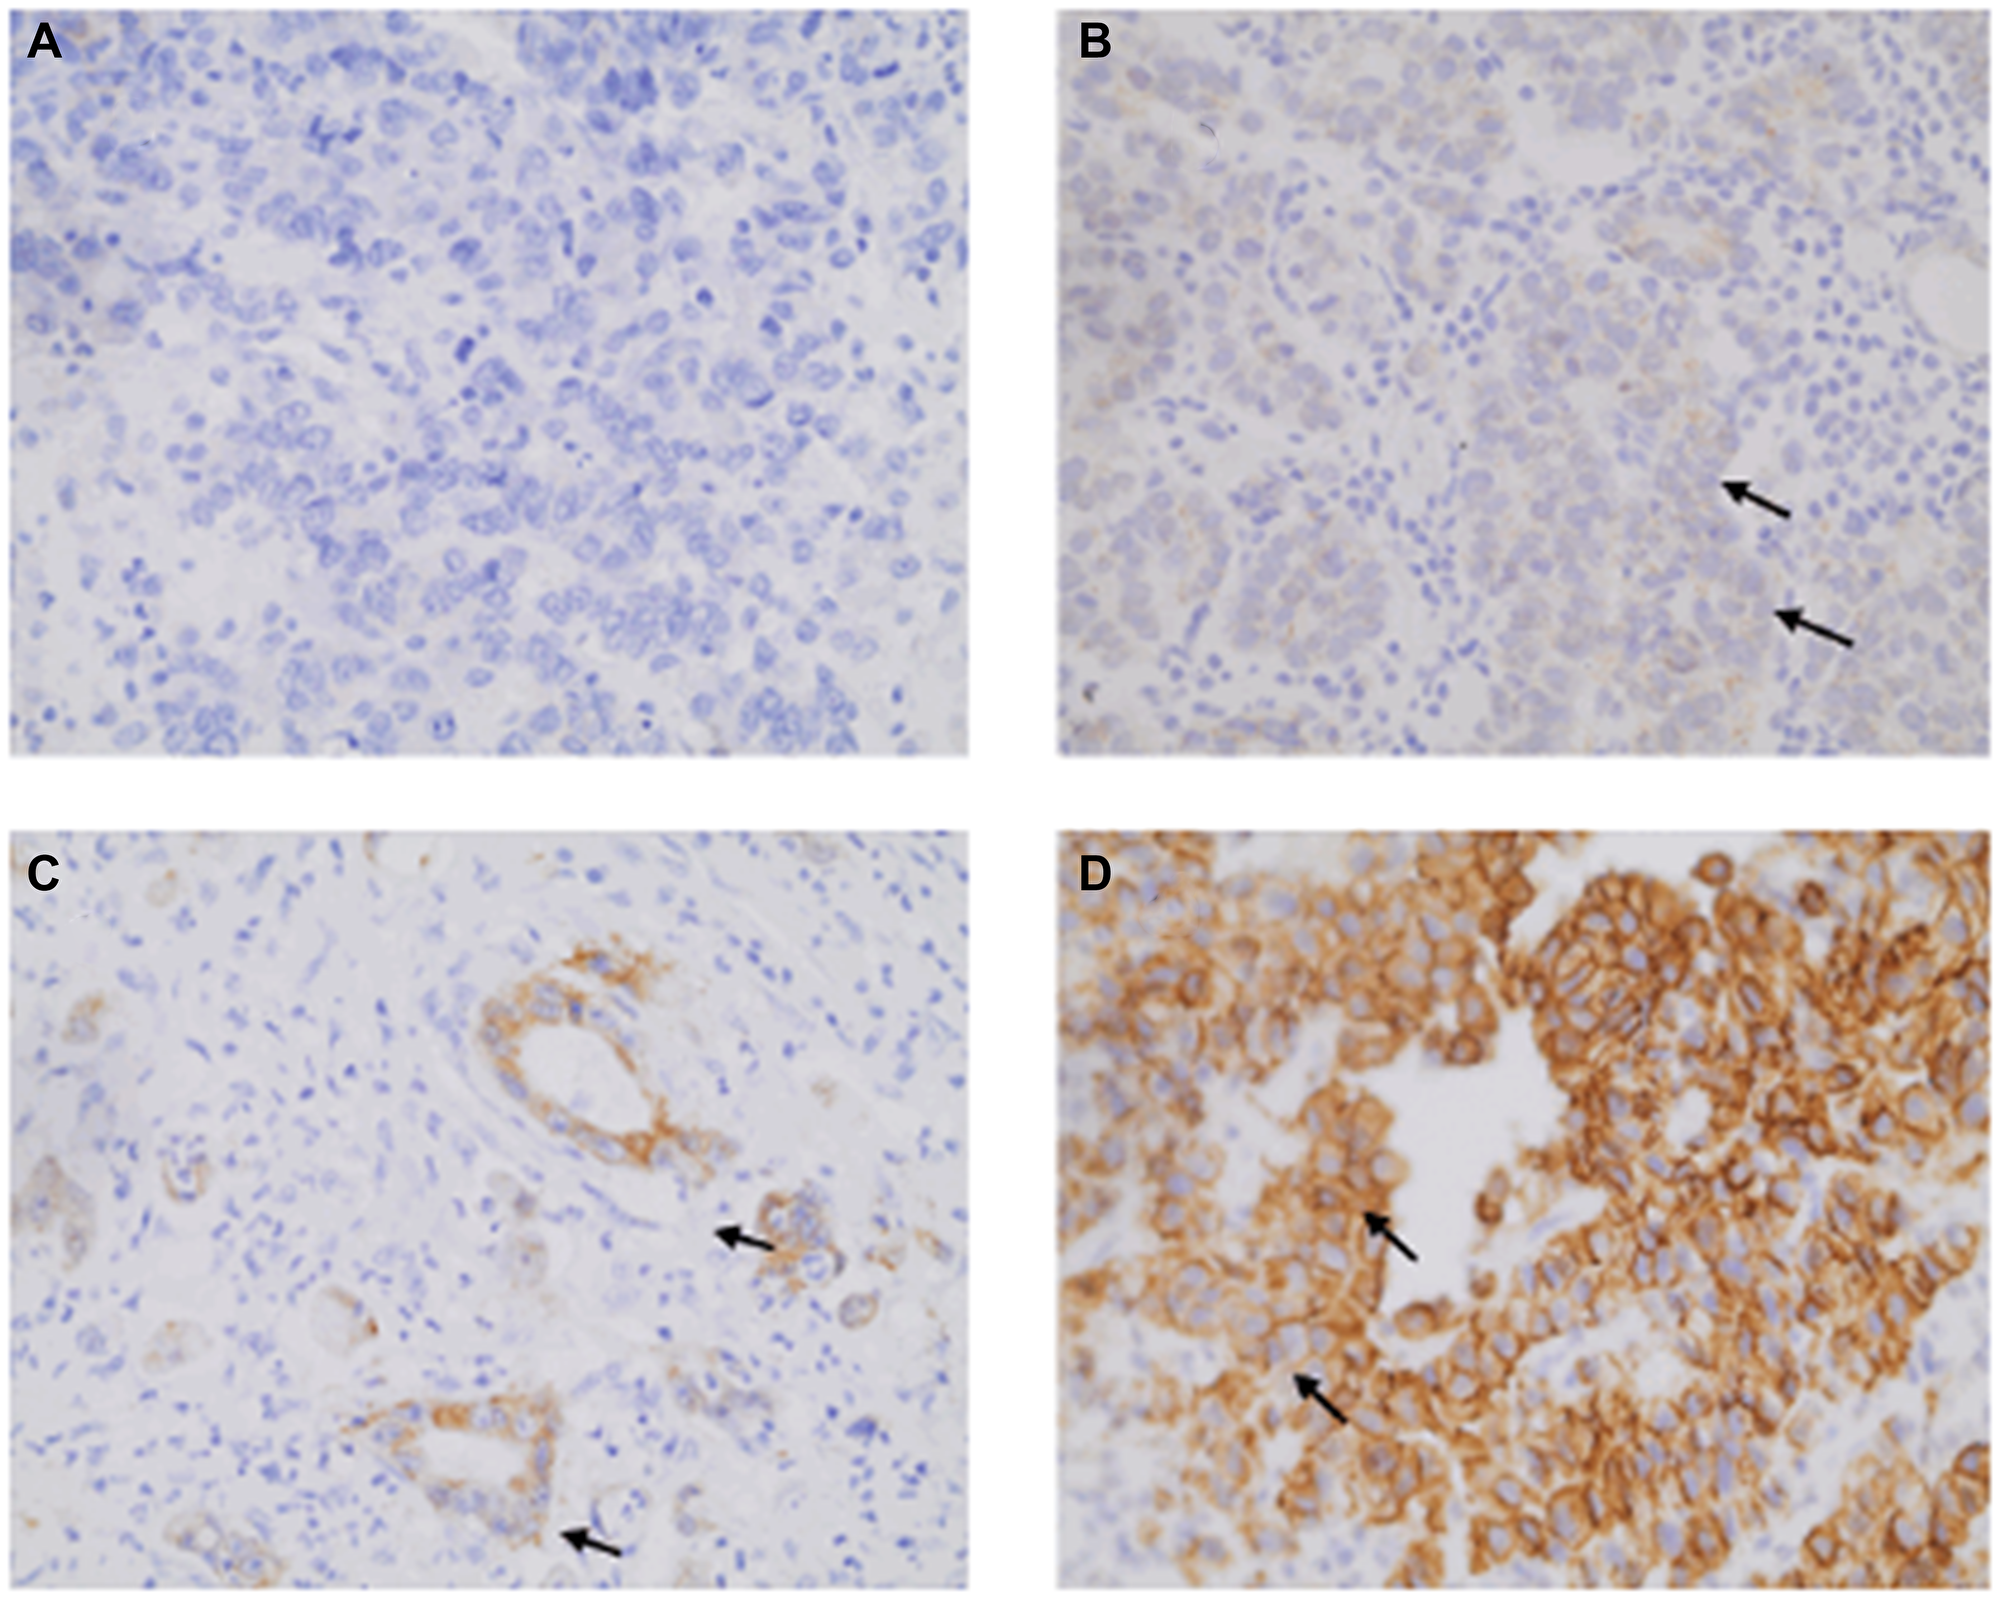 Illustrative HER2 immunohistochemistry labeling observed for gastric adenocarcinoma (GA) patients at 400× magnification.